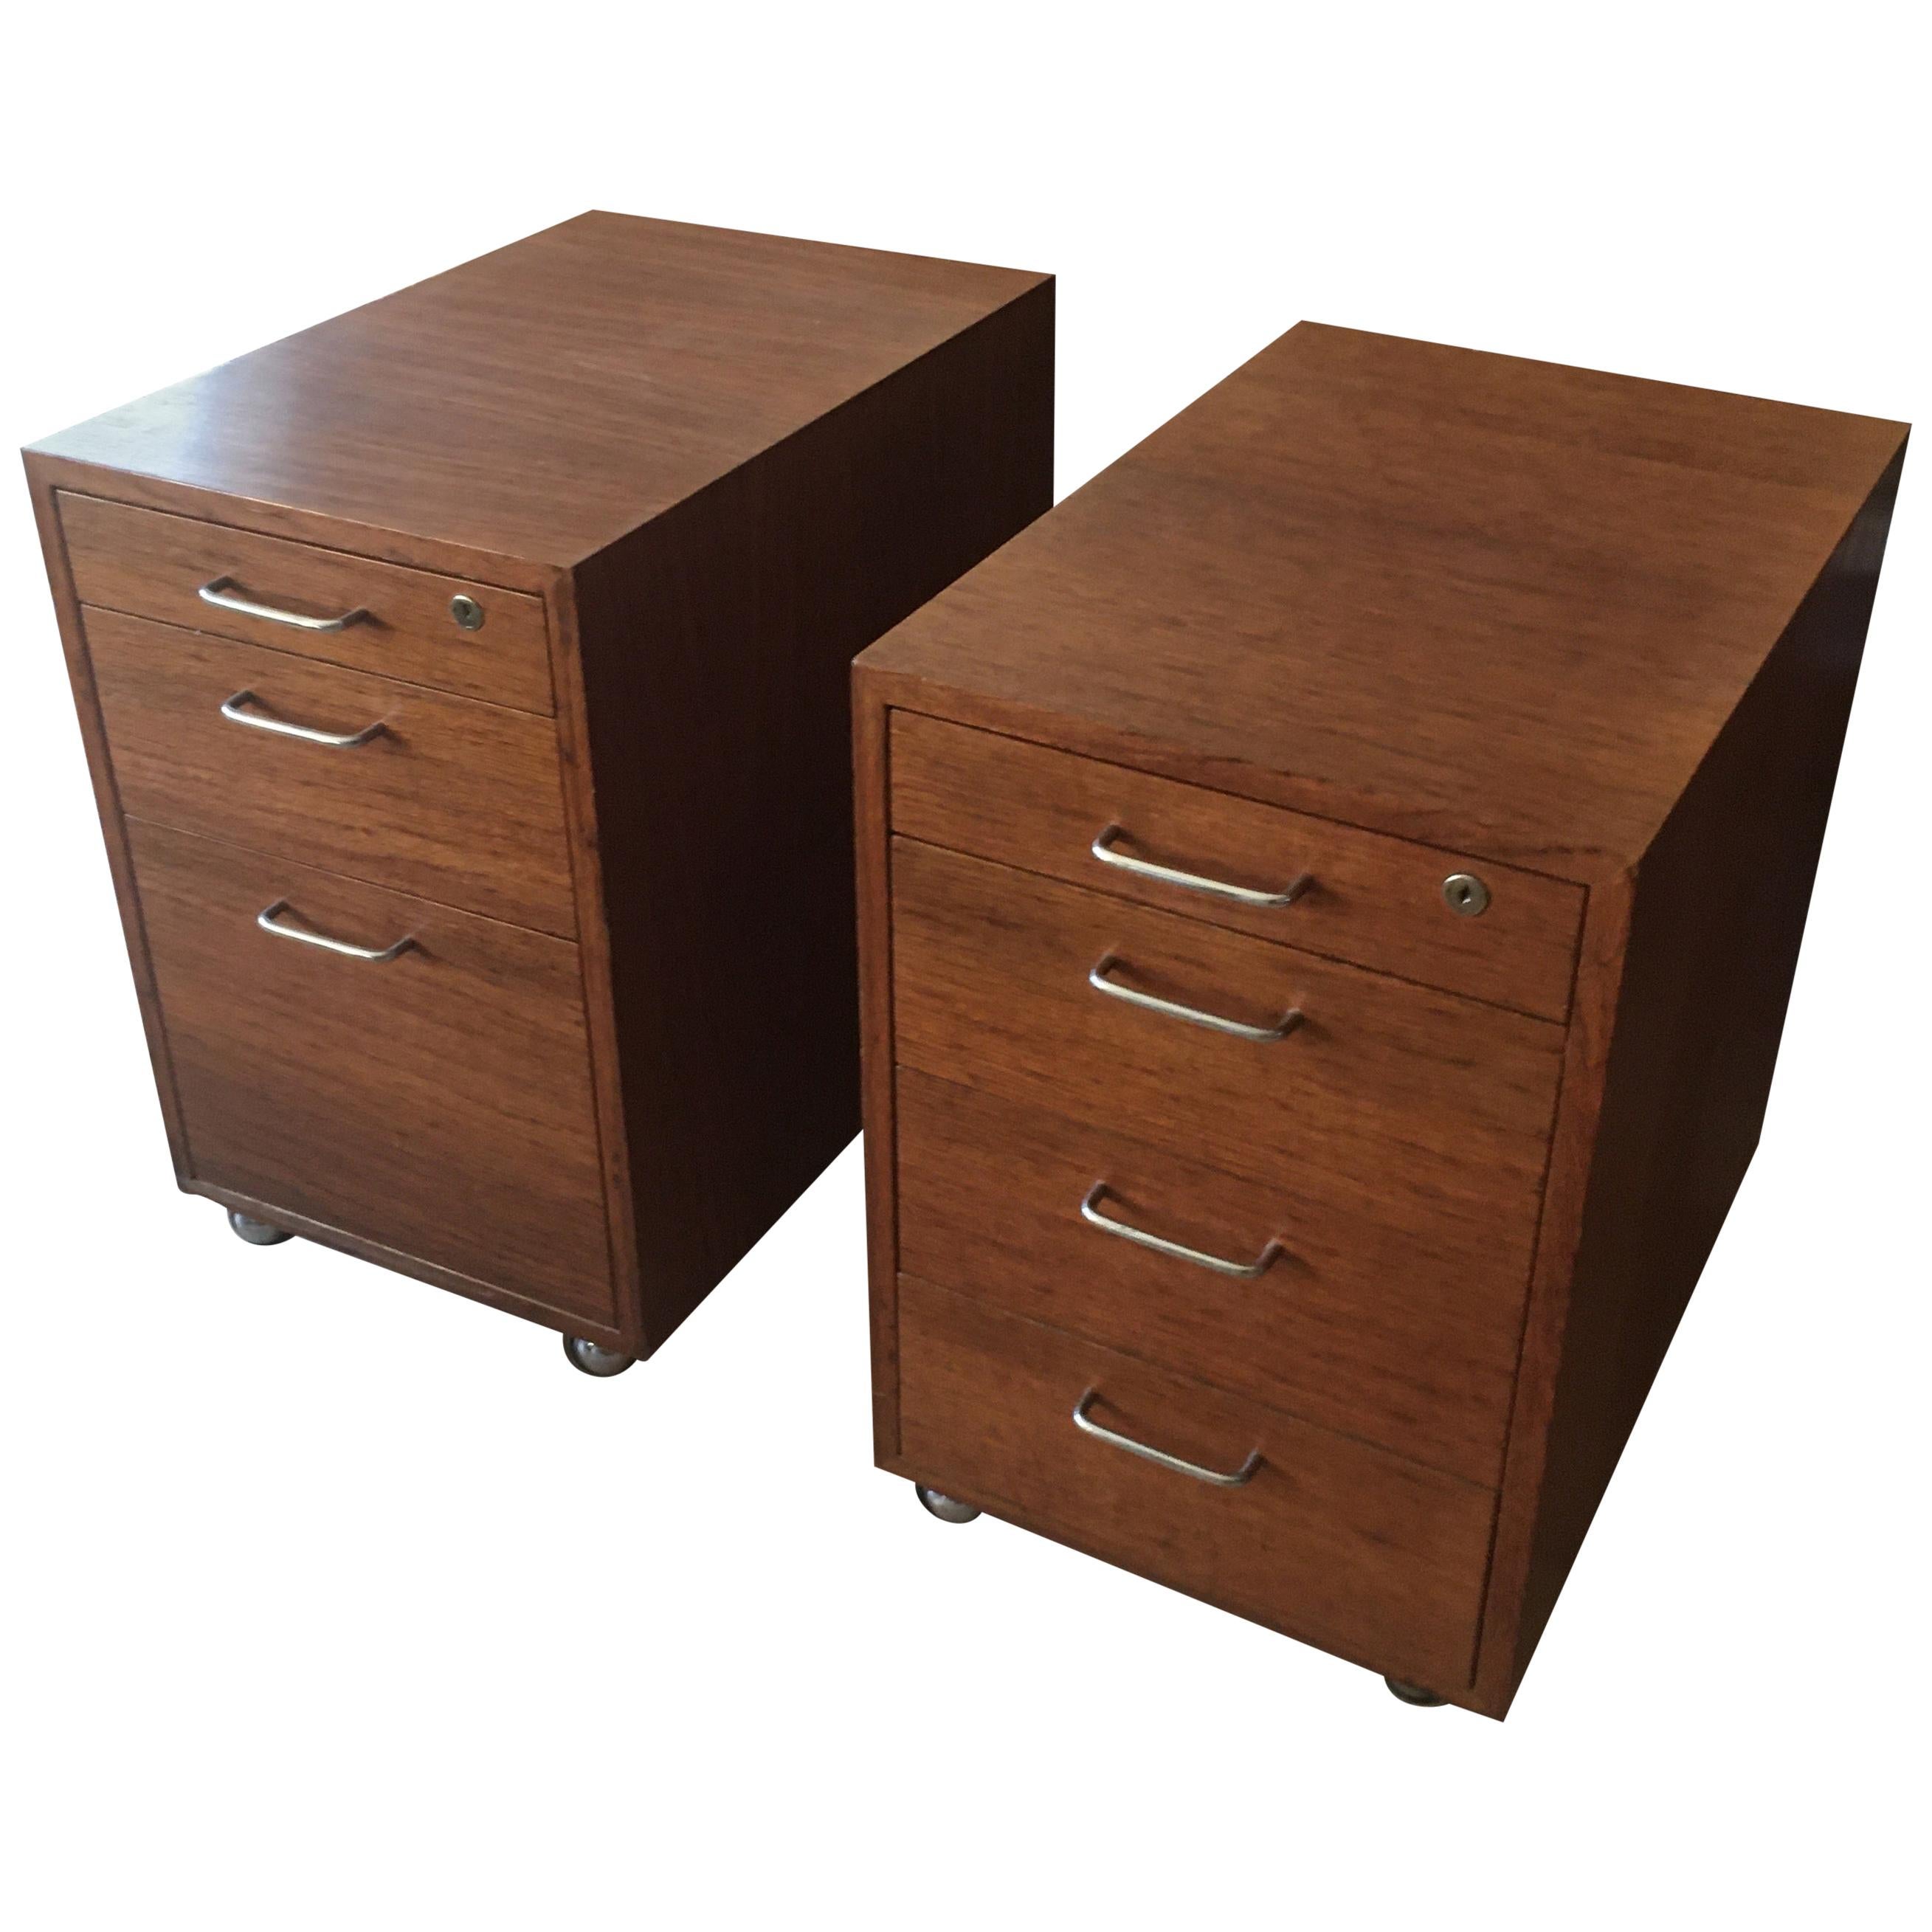 Midcentury Teak Three-Drawer File Cabinets On Casters, Great Bed Side Tables